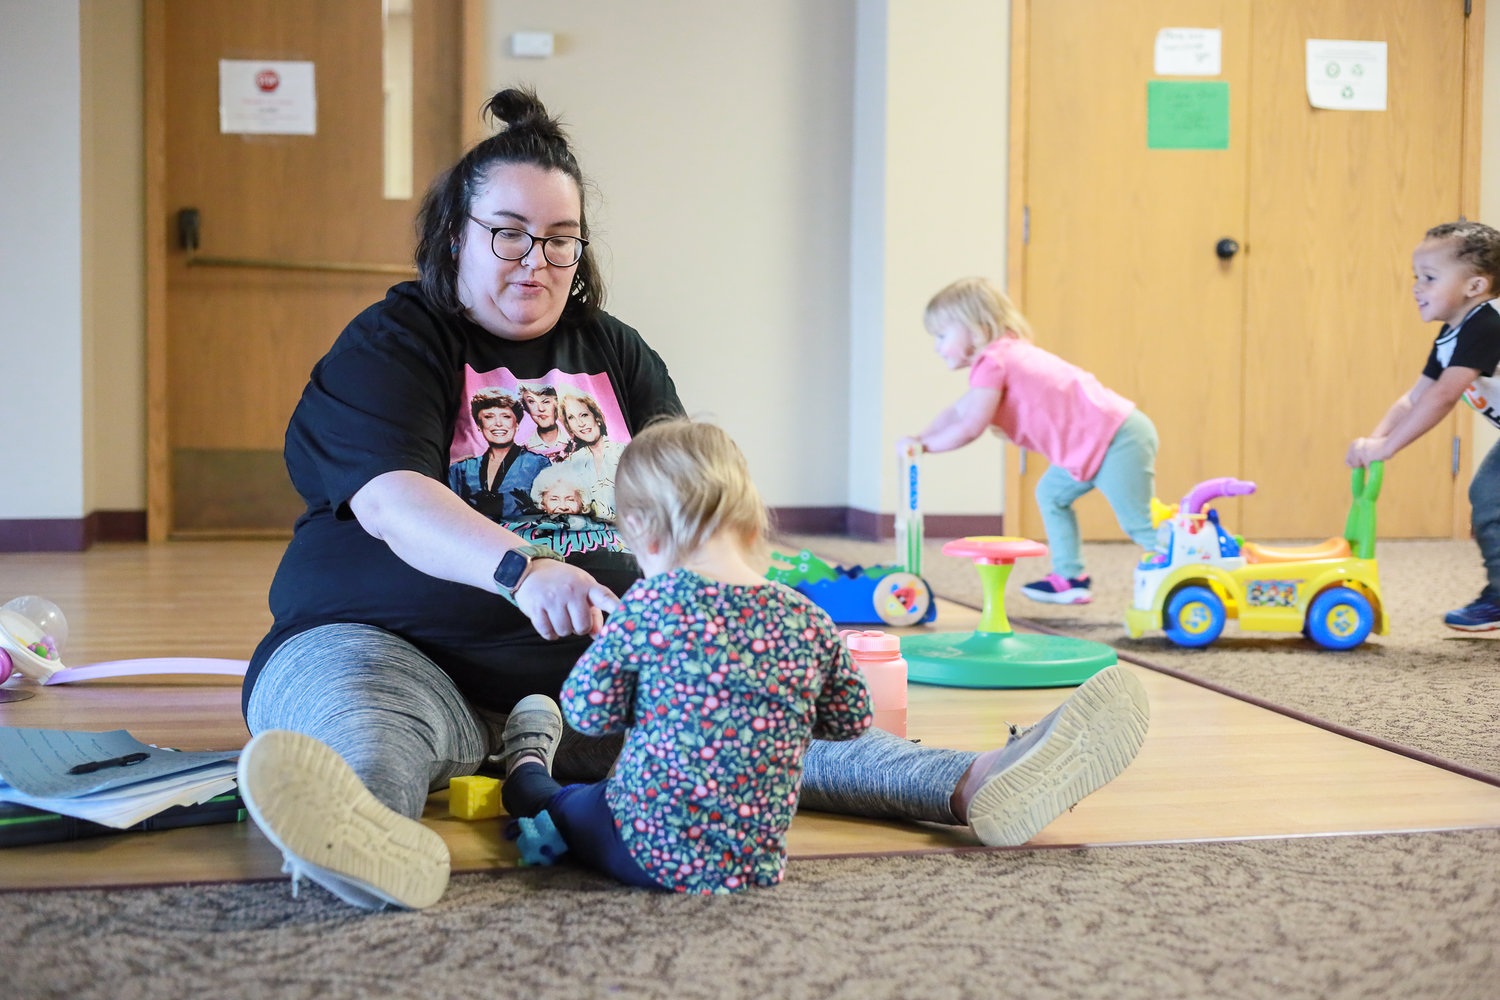 Amber Boone, lead teacher for 2-year-olds at Lighthouse Child and Family Development Center at Messiah Evangelical Lutheran Church, works with a child as others race push toys behind her.